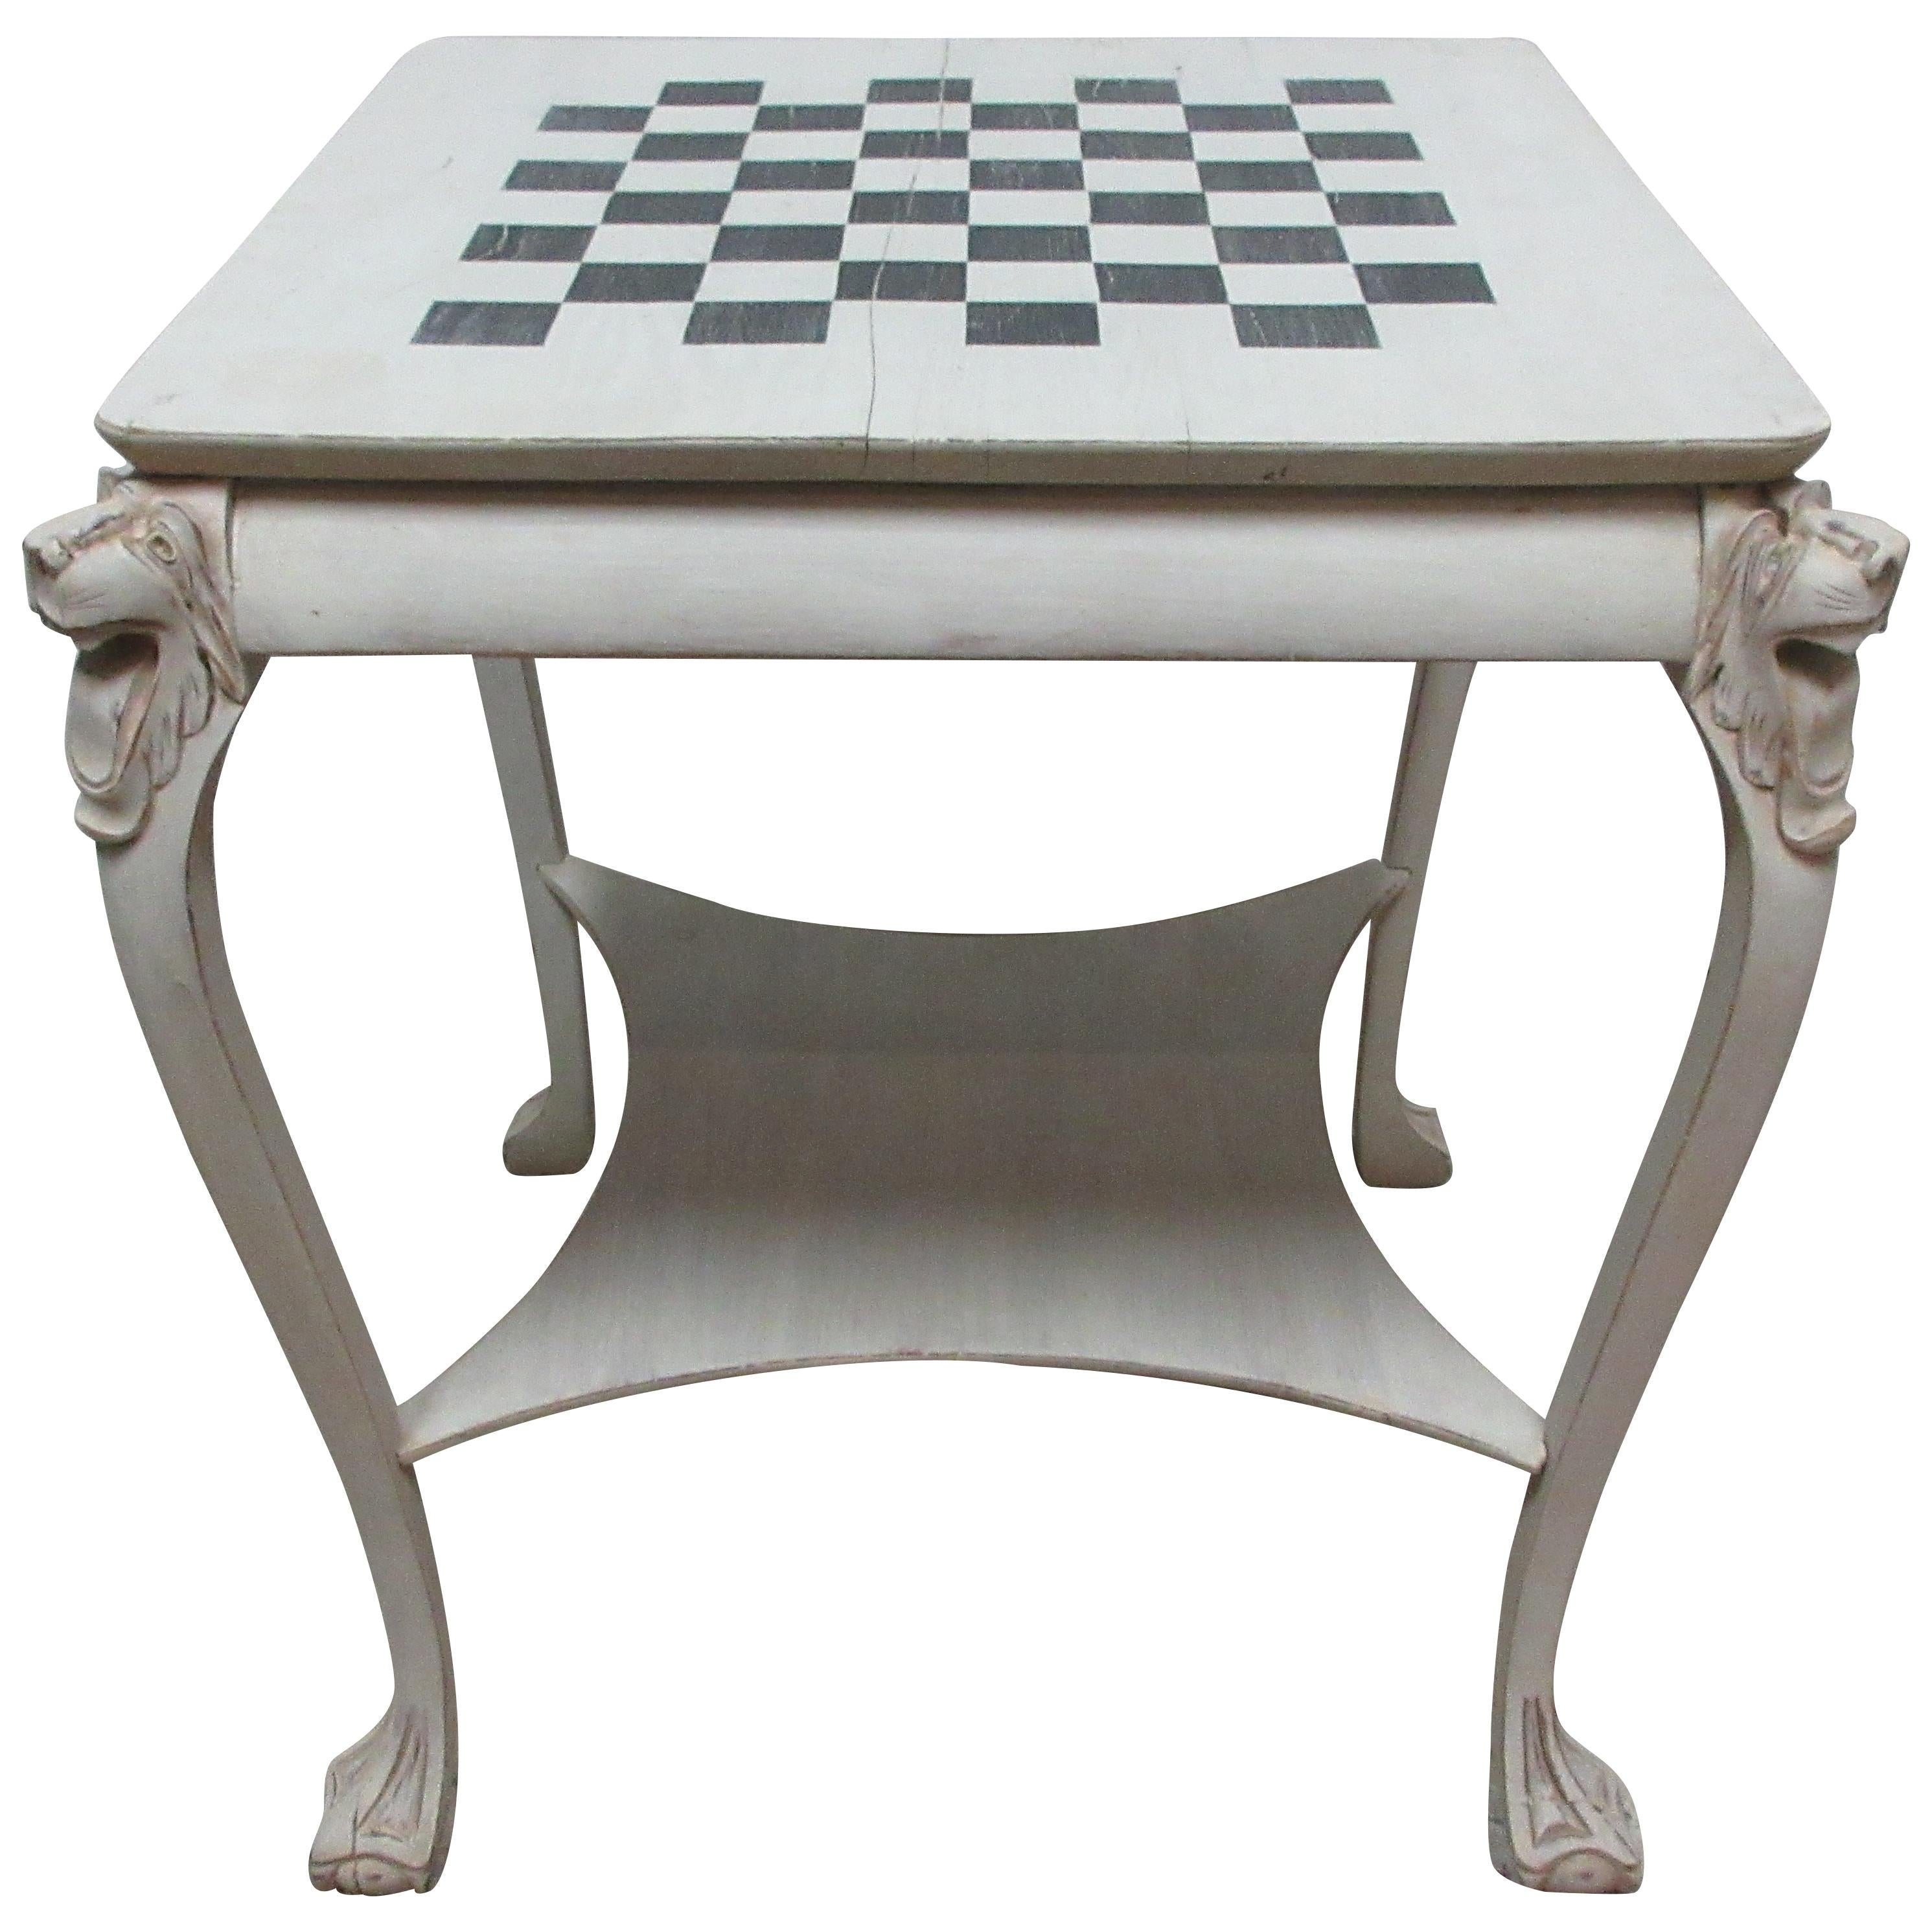 Lions Head Chess Table